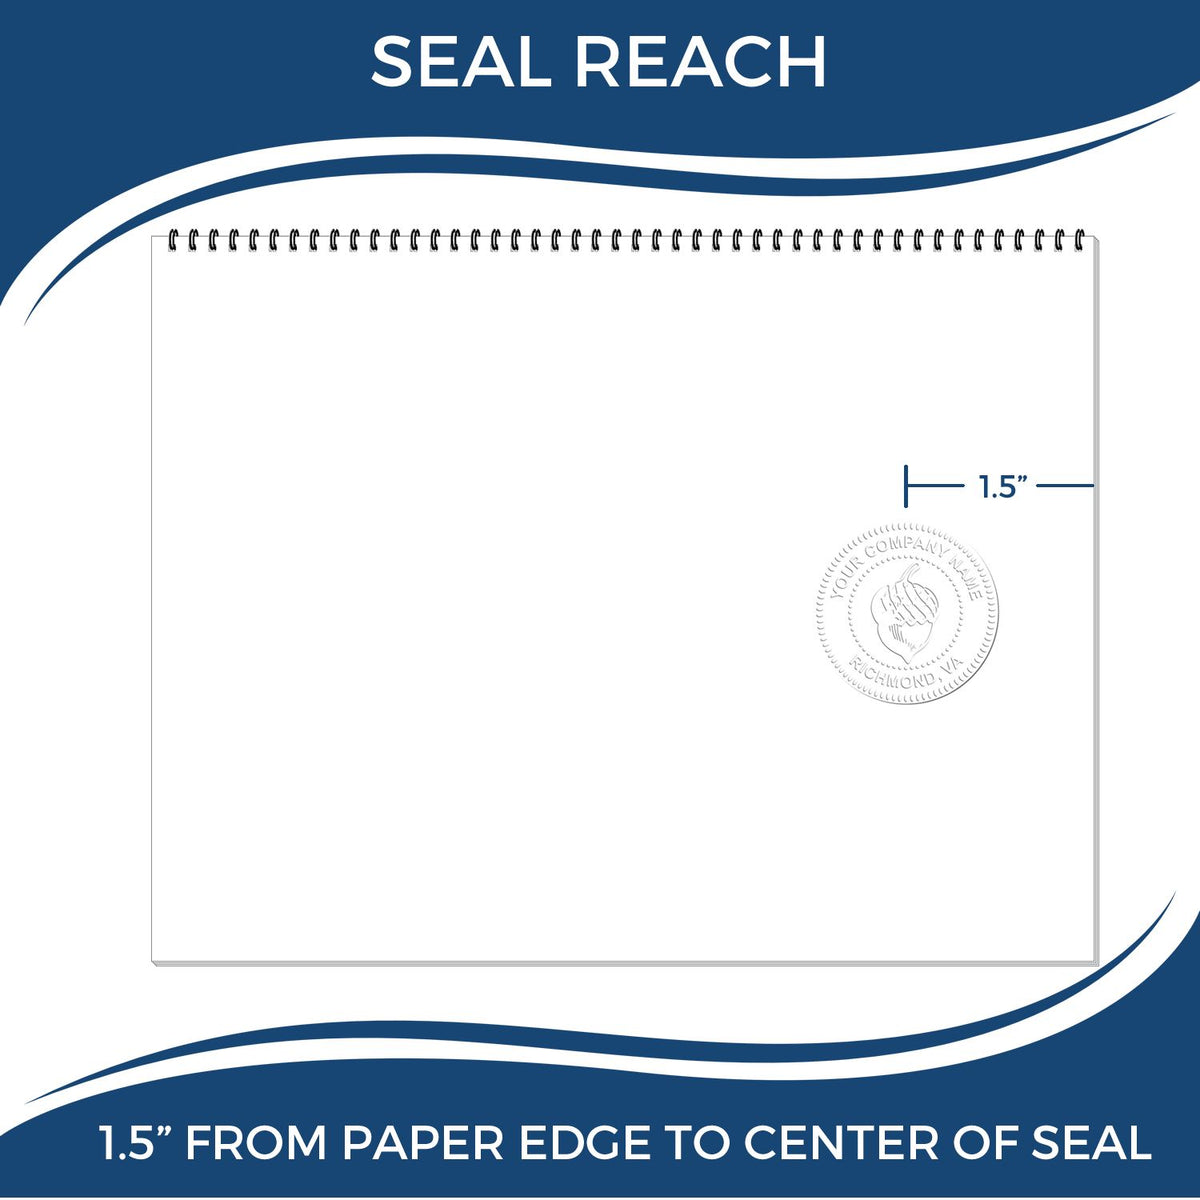 An infographic showing the seal reach which is represented by a ruler and a miniature seal image of the Soft New Mexico Professional Engineer Seal